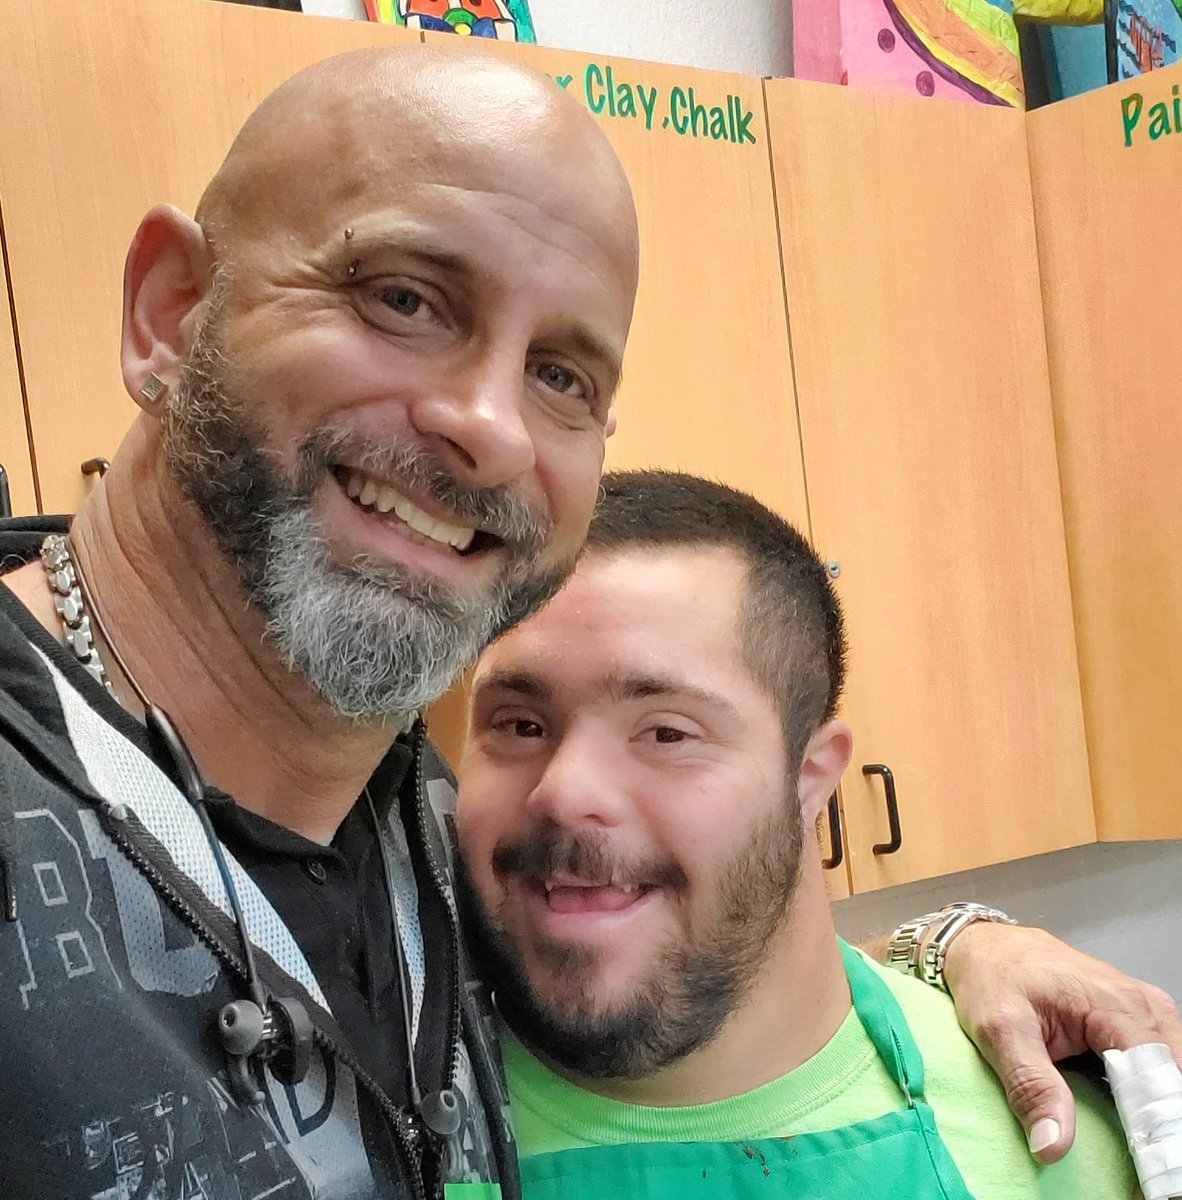 We can learn so much from this man. Pure heart, absolutely no judgment, speaks exactly what's on his mind, but the most amazing thing is that to him the world is a beautiful loving place. Loved visiting the @wowcentermiami #MarlowRosado #Salsanimal #boricua #MomentsThatMatter